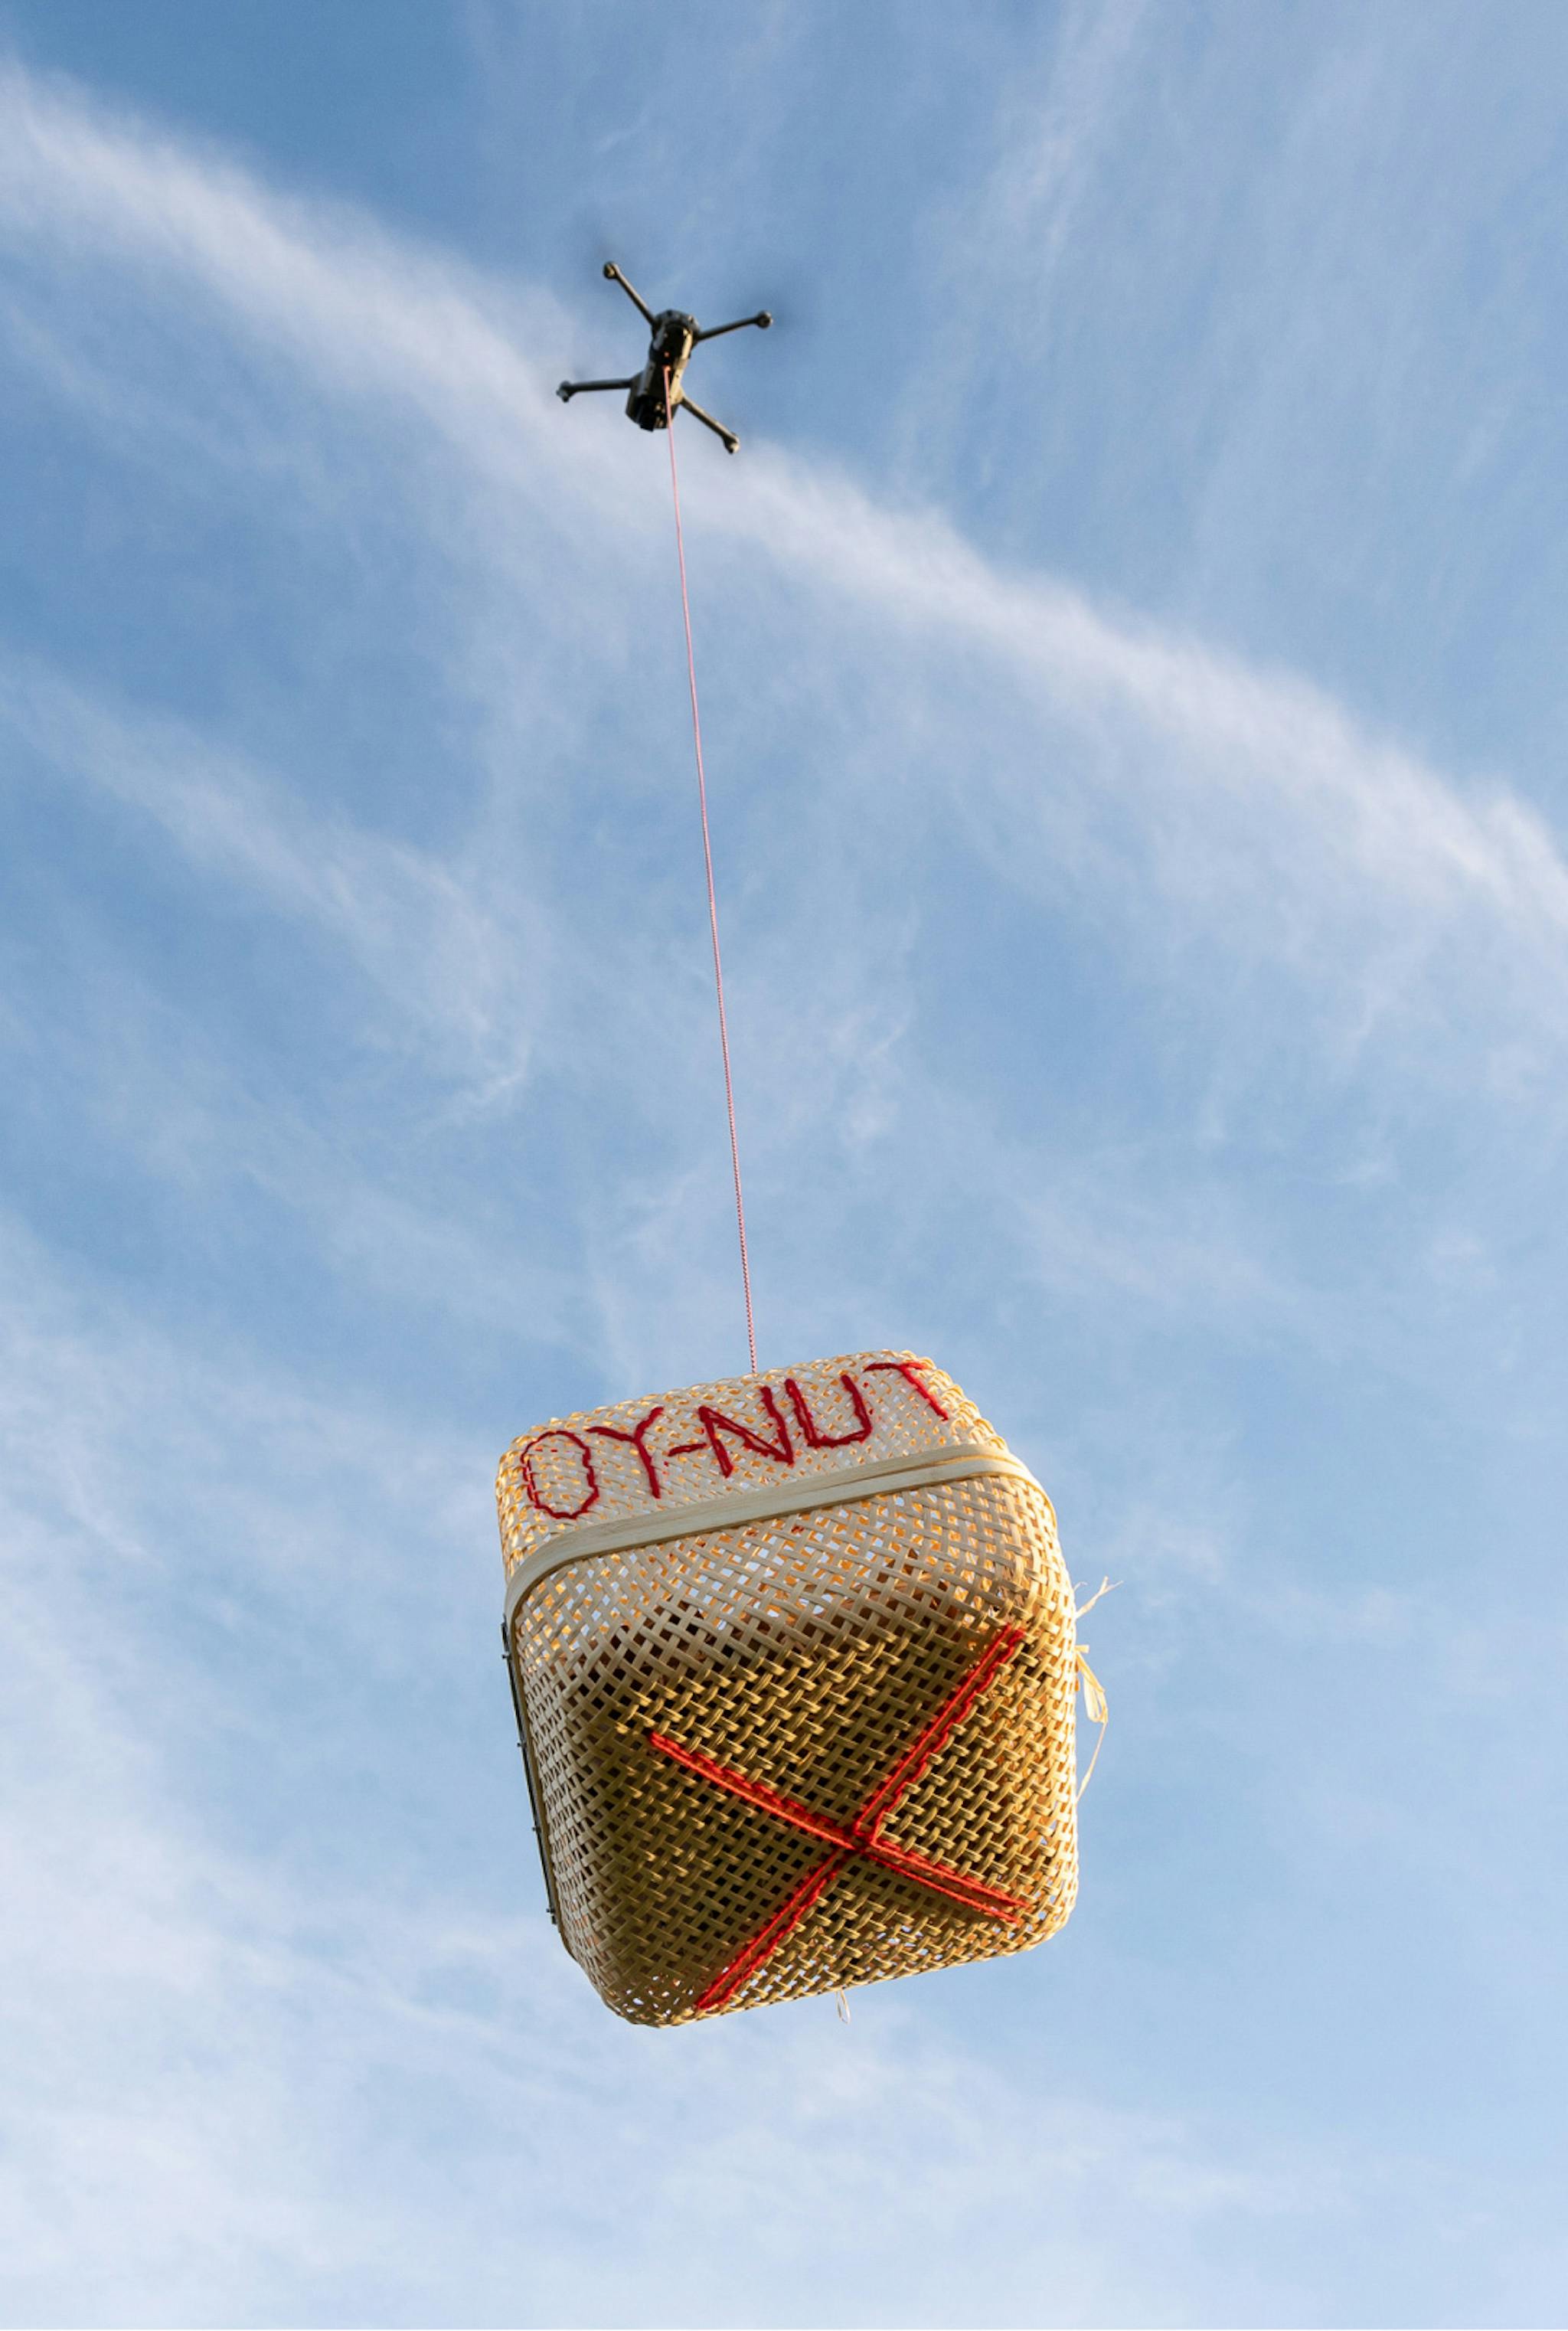 A close up of a basket in the air being lifted by a drone. 